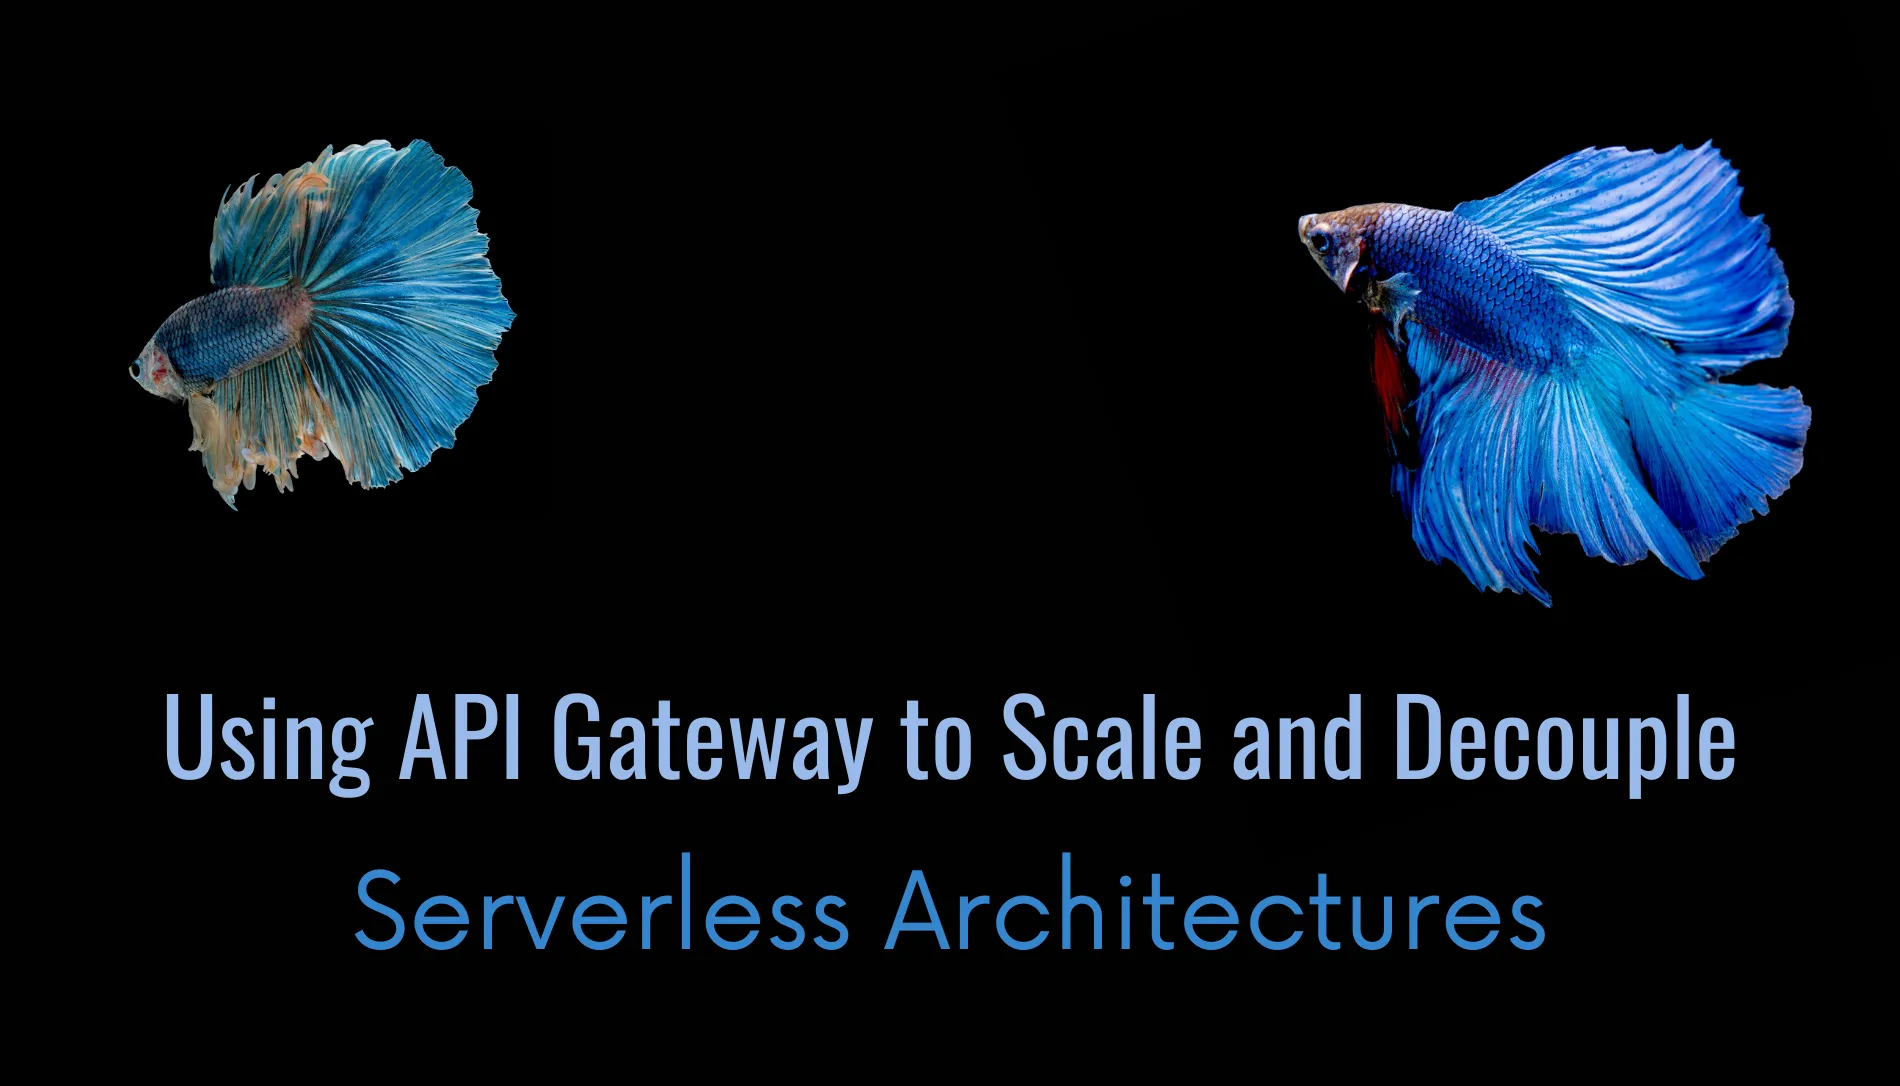 featured image - How To Use Amazon API Gateway to Decouple and Scale Serverless Architectures